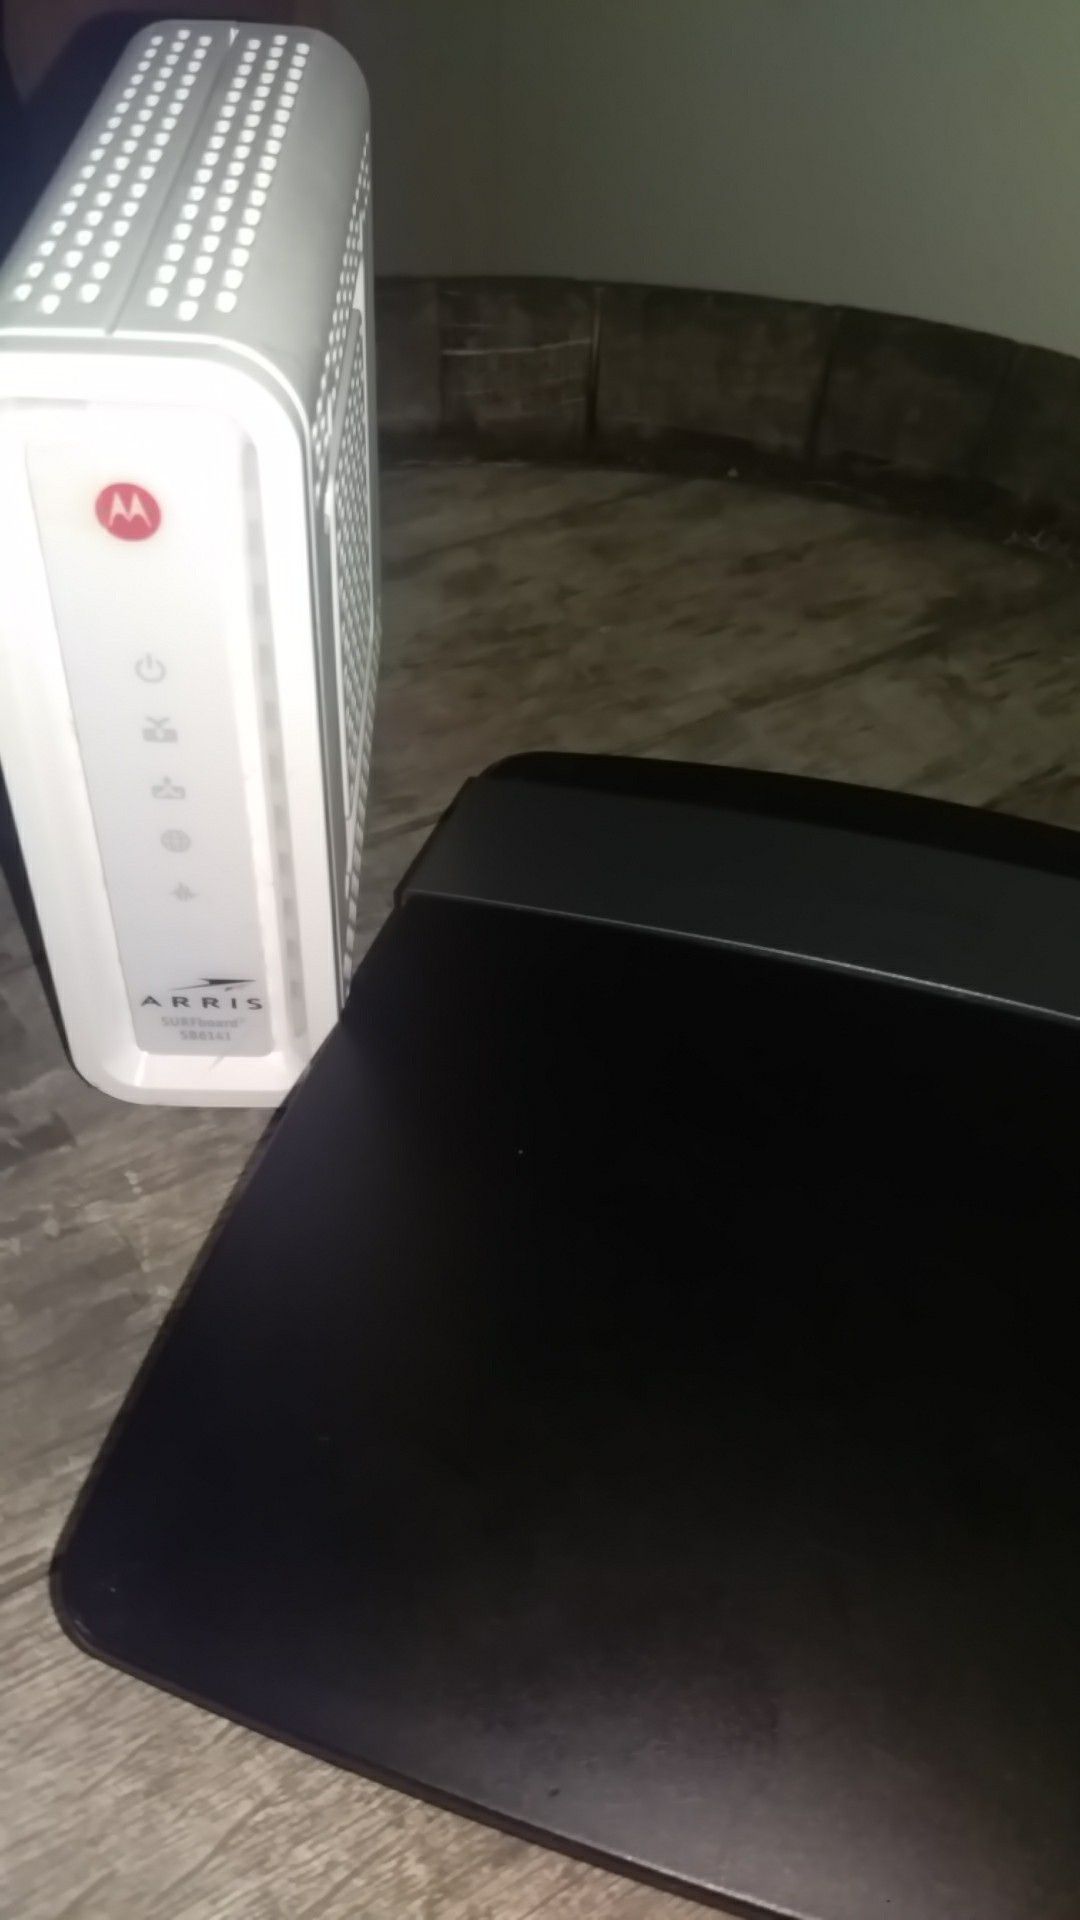 Good as new router and modem